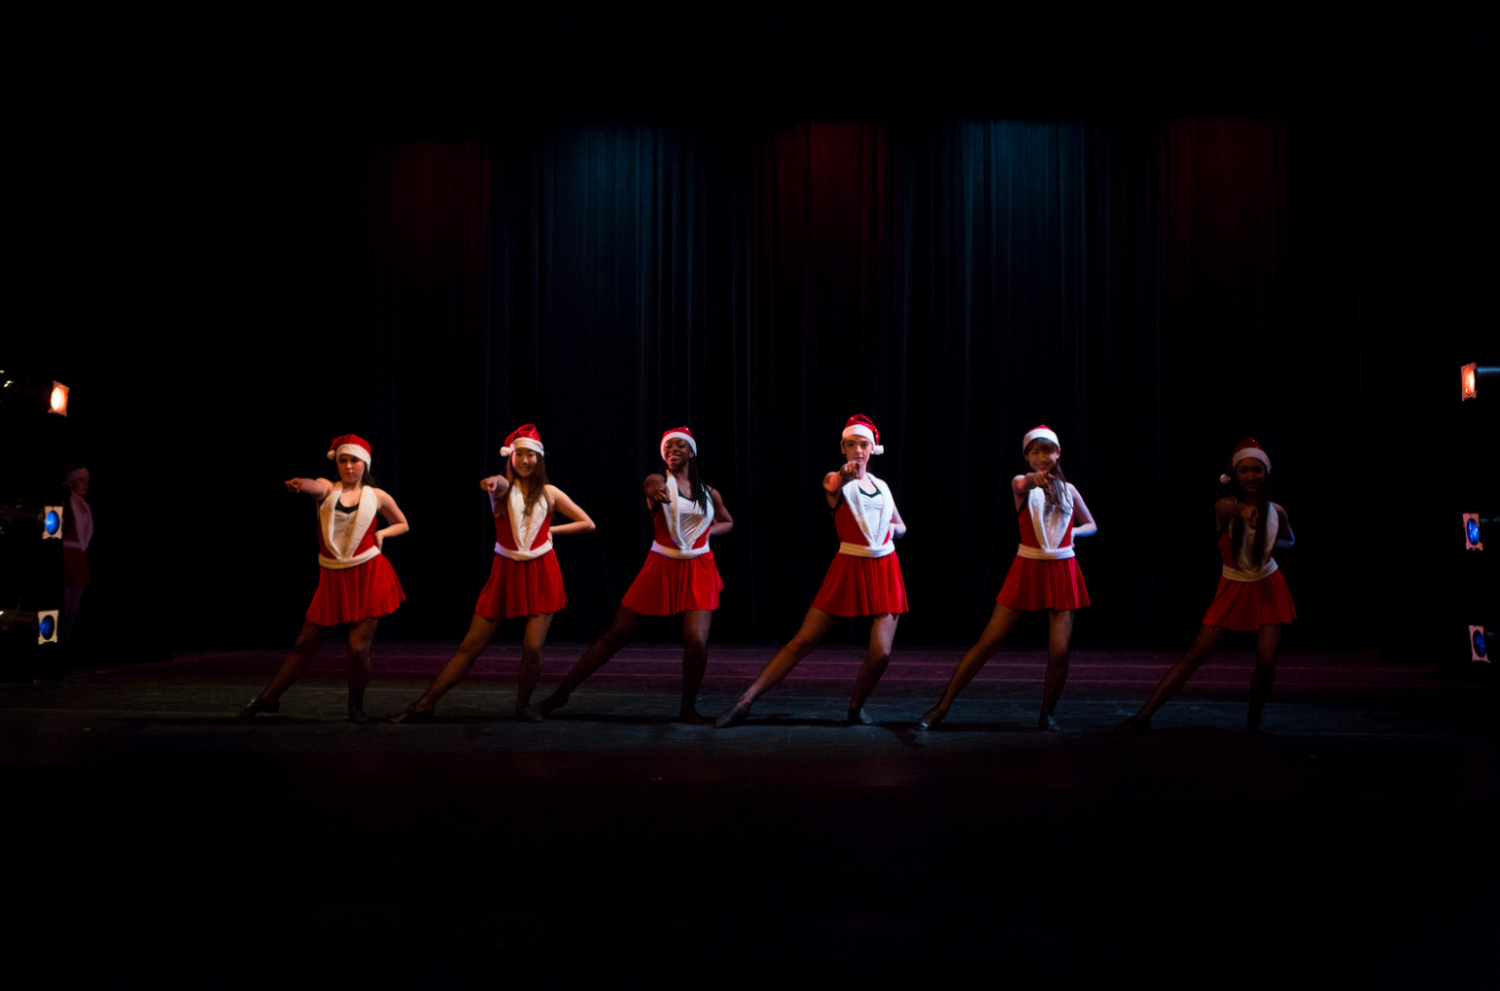 Gabby (far left), Destiny (third from left), and Makenna (fourth from left) perform as Rockettes in the fall dance concert Contagion. Credit: Flickr.